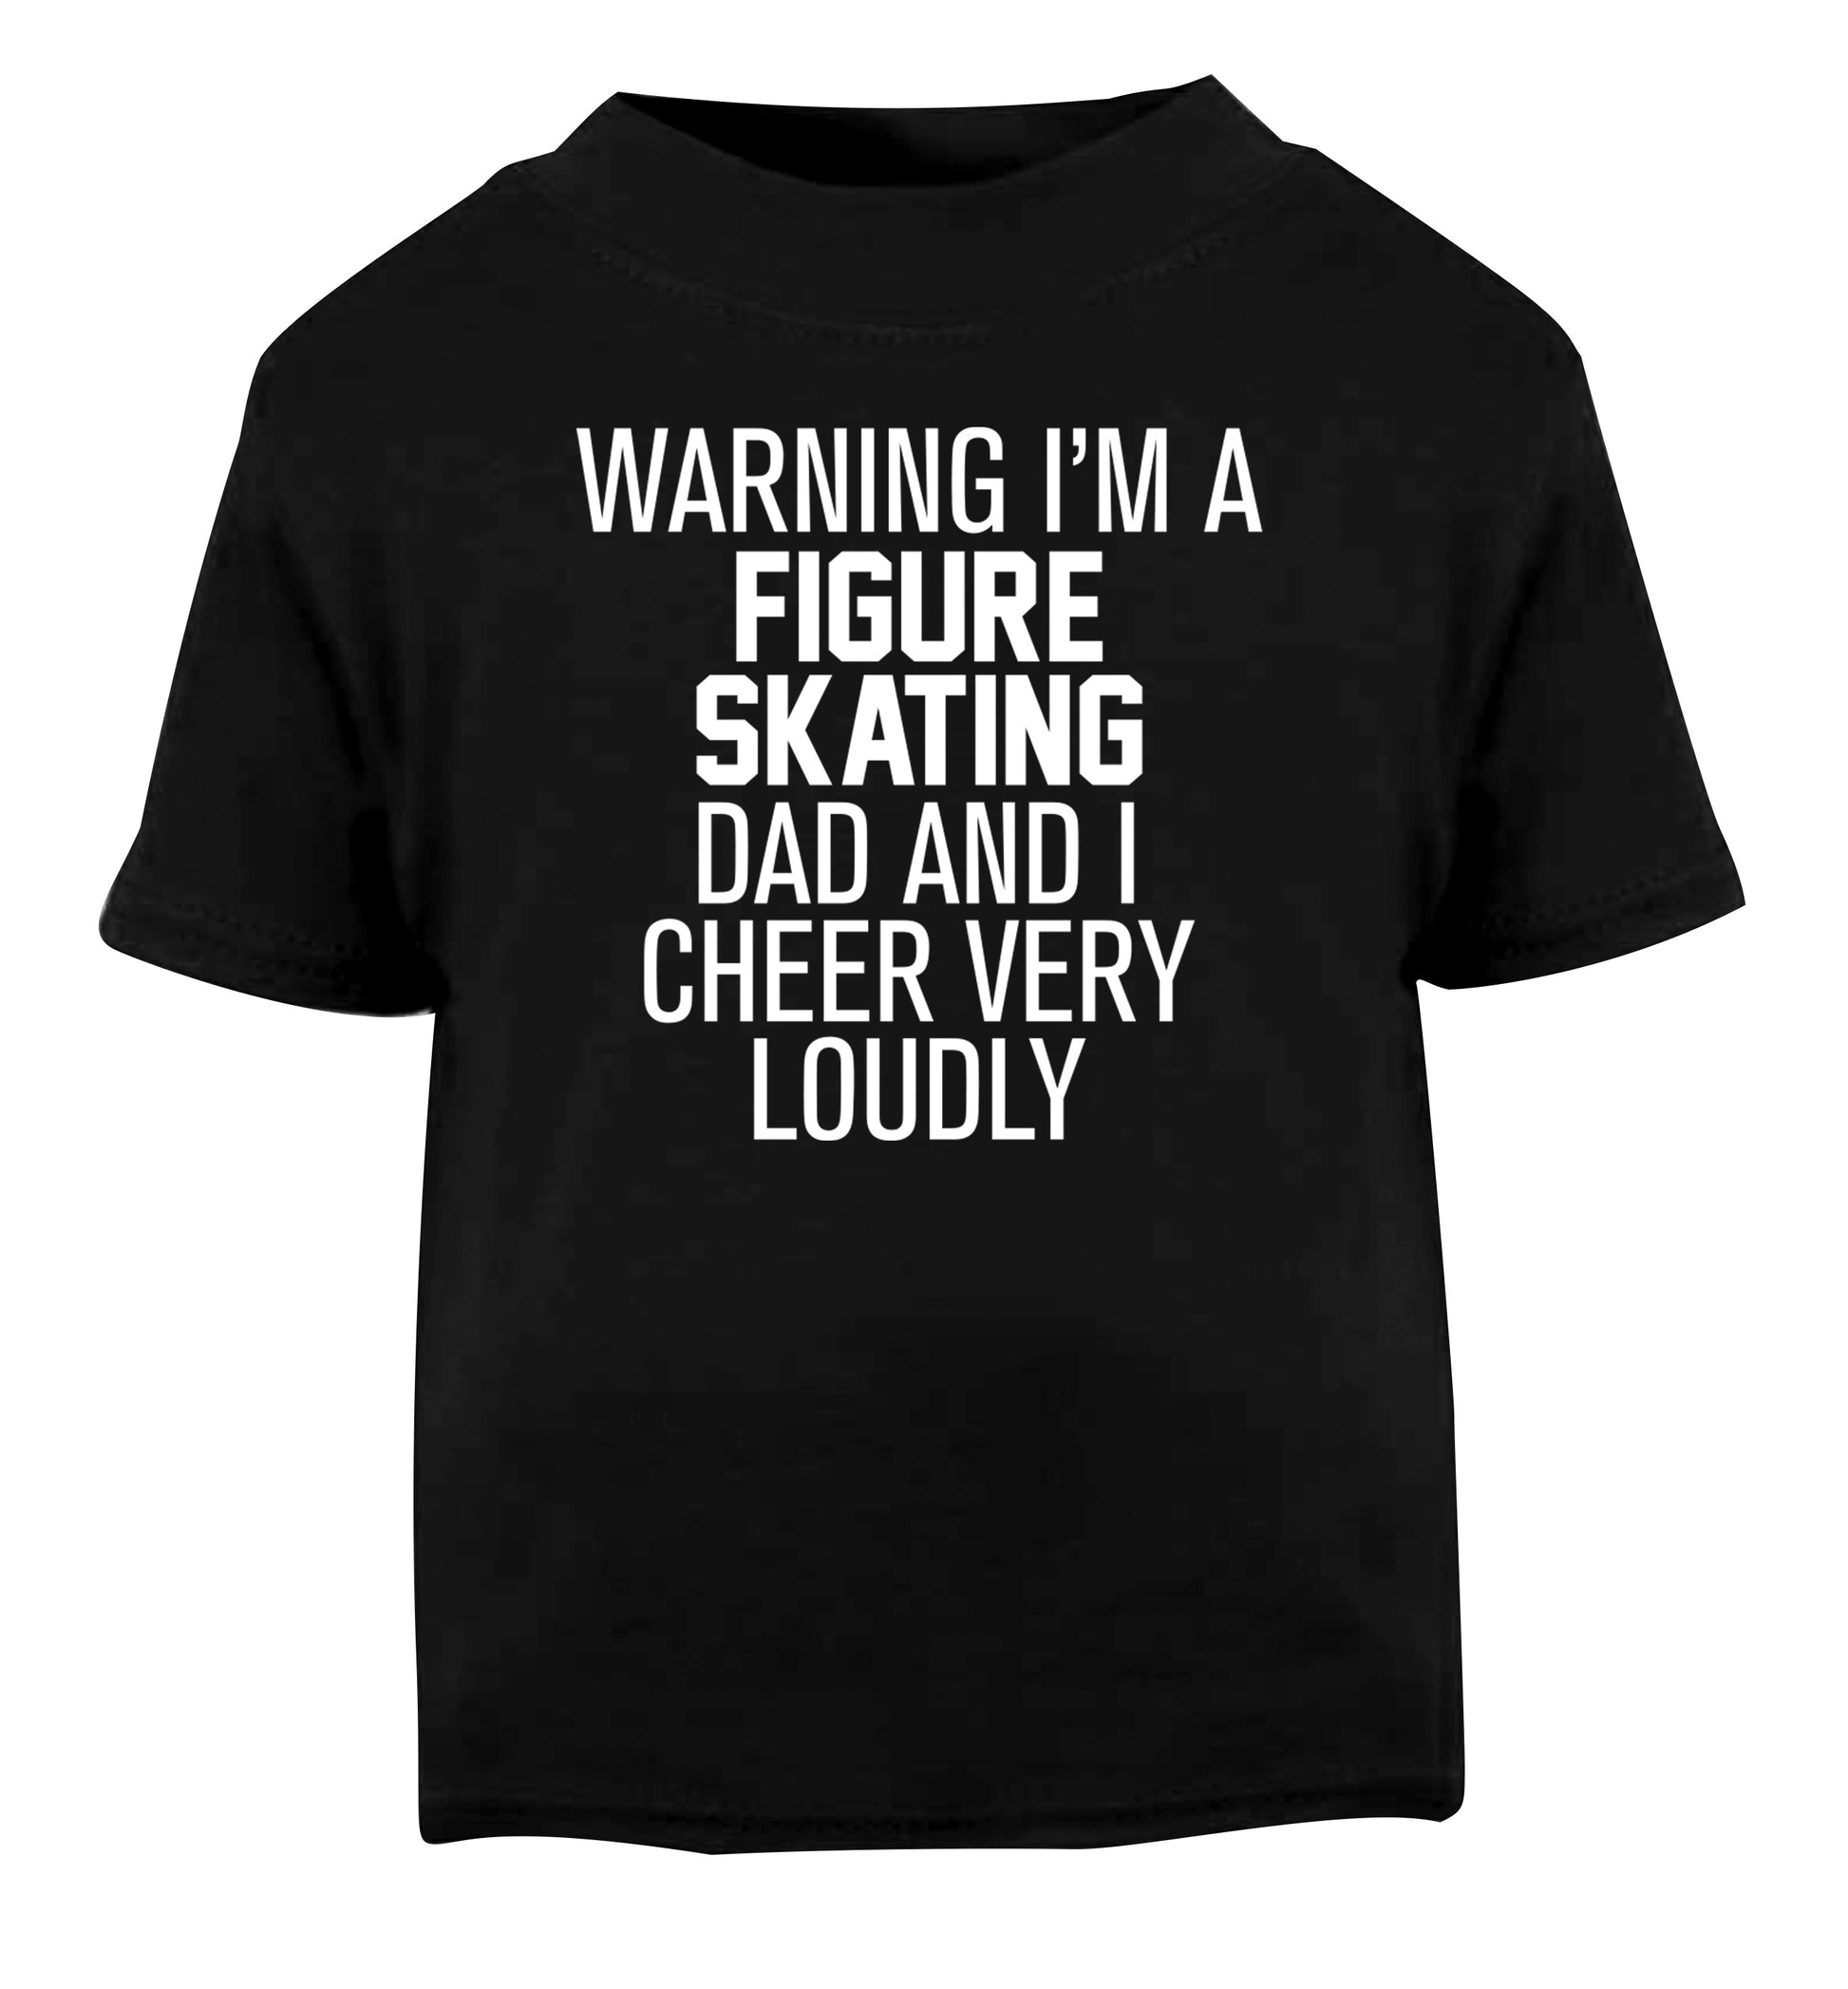 Warning I'm a figure skating dad and I cheer very loudly Black Baby Toddler Tshirt 2 years